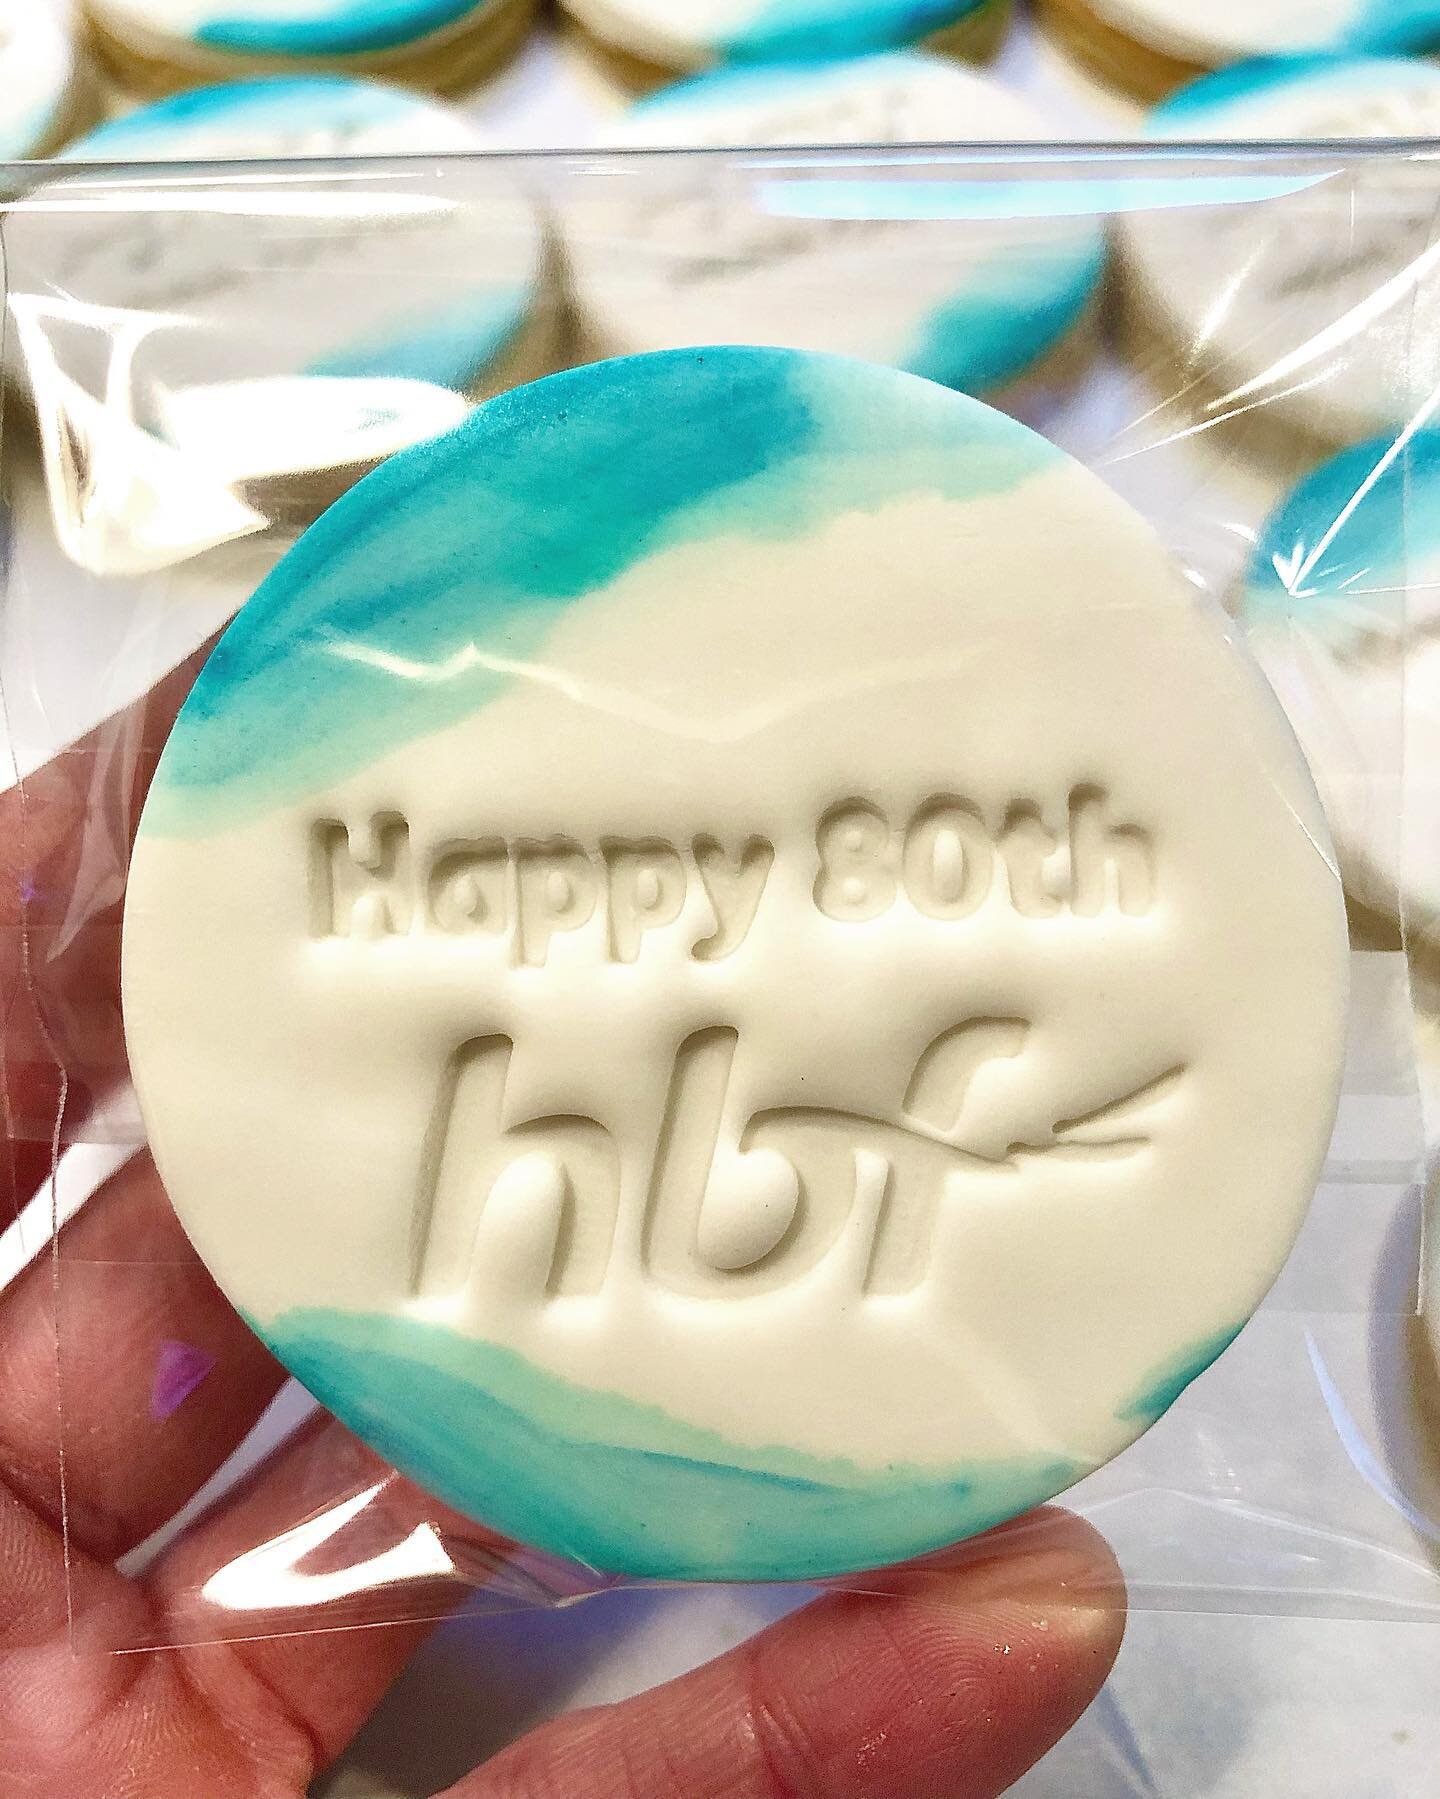 Happy 80th Birthday hbf! 🎈

We had the pleasure of making a heap of cookies and cupcakes for the WA branches this week. 🎈